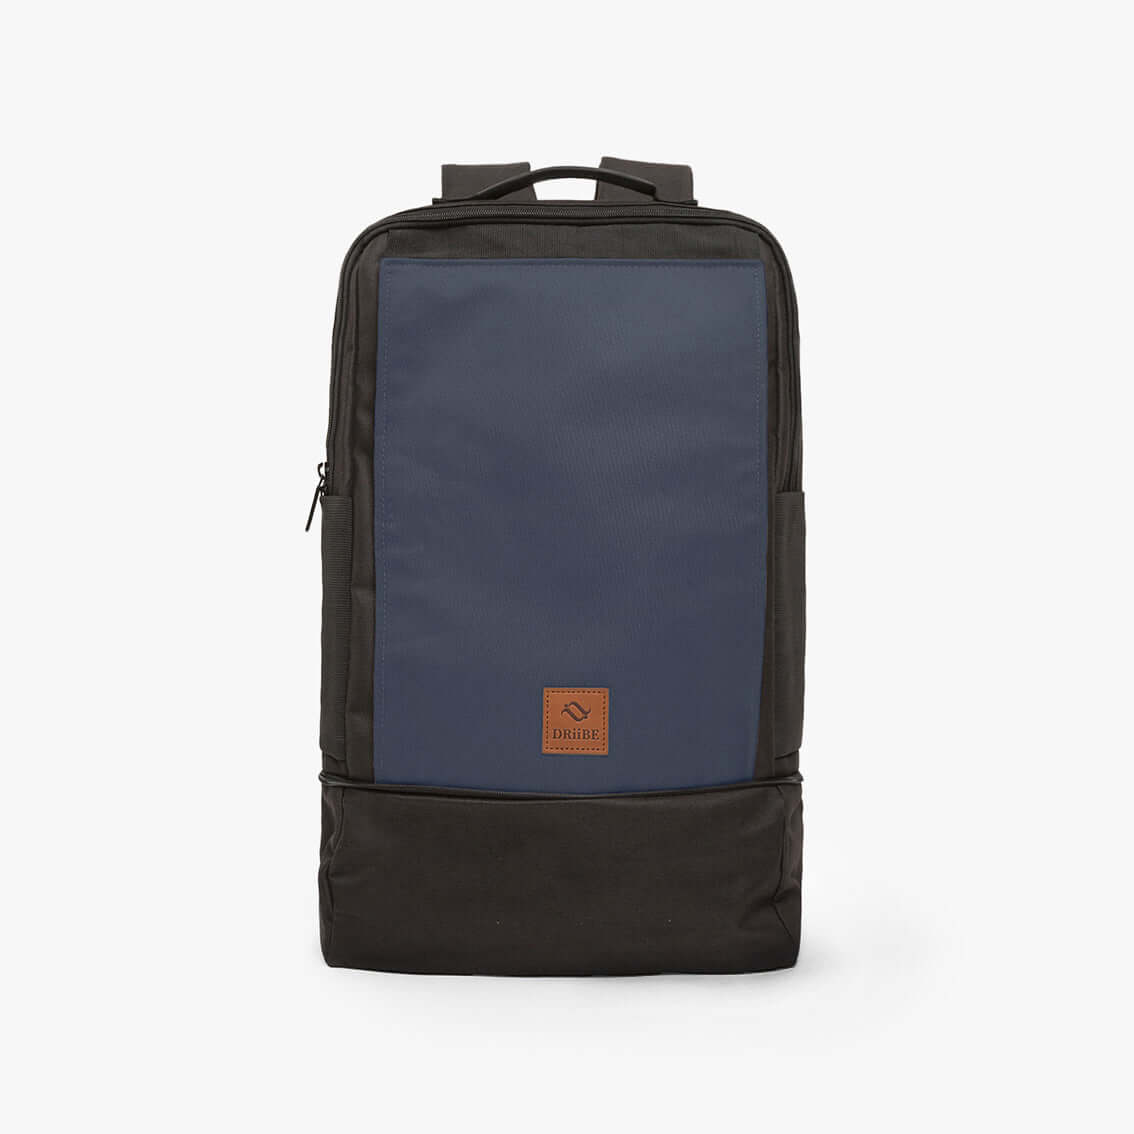 CITYC Laptop 2 in 1 Backpack Navy Blue-2